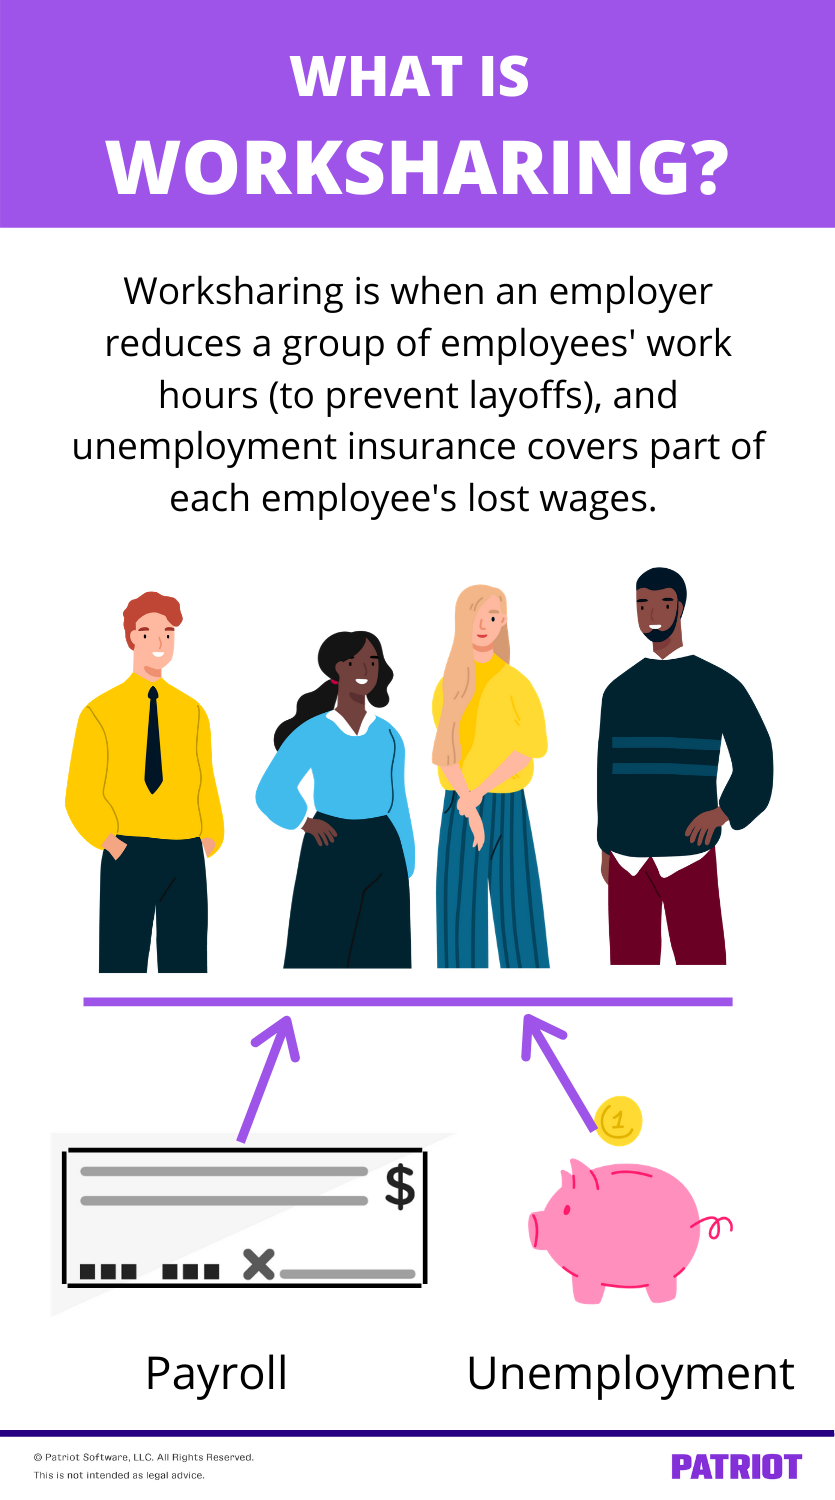 defines what is worksharing by showing a group of employees receiving funds from payroll and unemployment